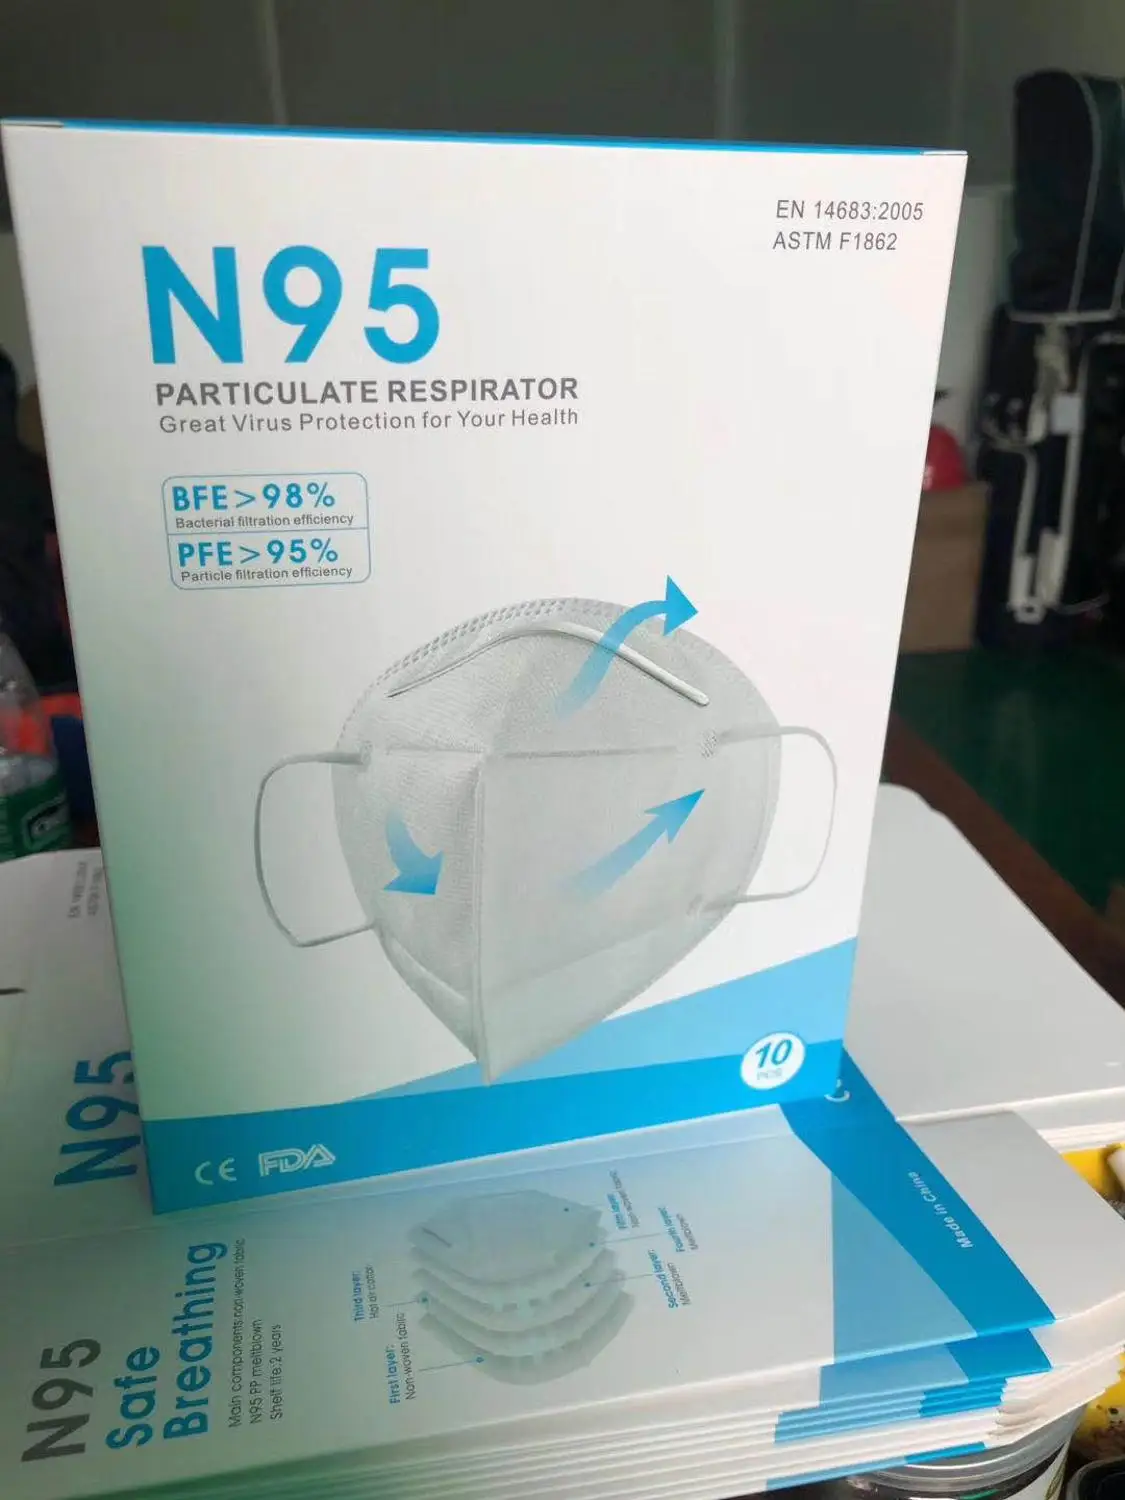 

N95 masksFace Mask Anti Dust Bacterial N95 Mask PM2.5 Dustproof Protective 95% Filtration KN95 Mouth Cover Features as FFP2